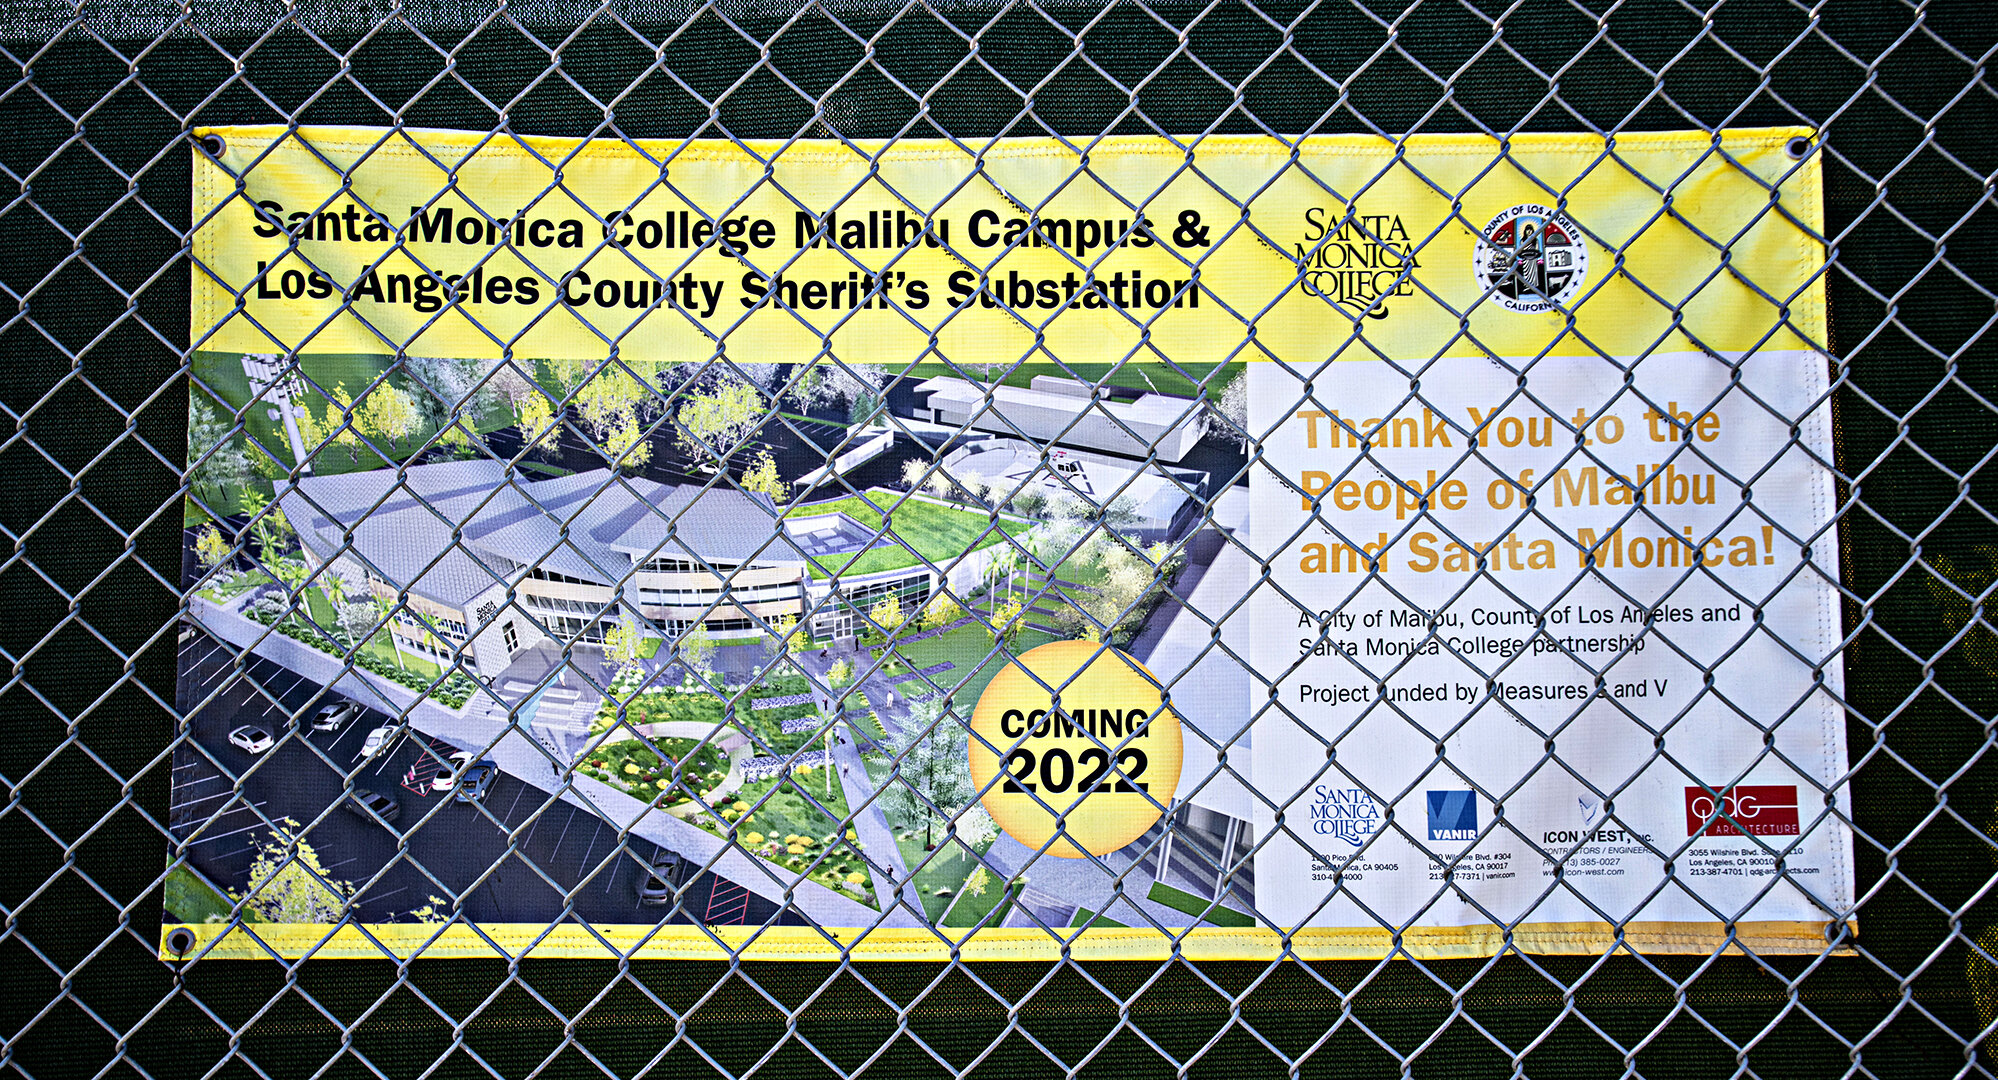  Construction continues at the Santa Monica College Malibu campus/ Los Angeles County Sheriff's Substation on April 3, 2021 in Malibu, Calif. The new facility roughly sitting at 27,500 square feet will include classrooms, computer abnd science labs, 